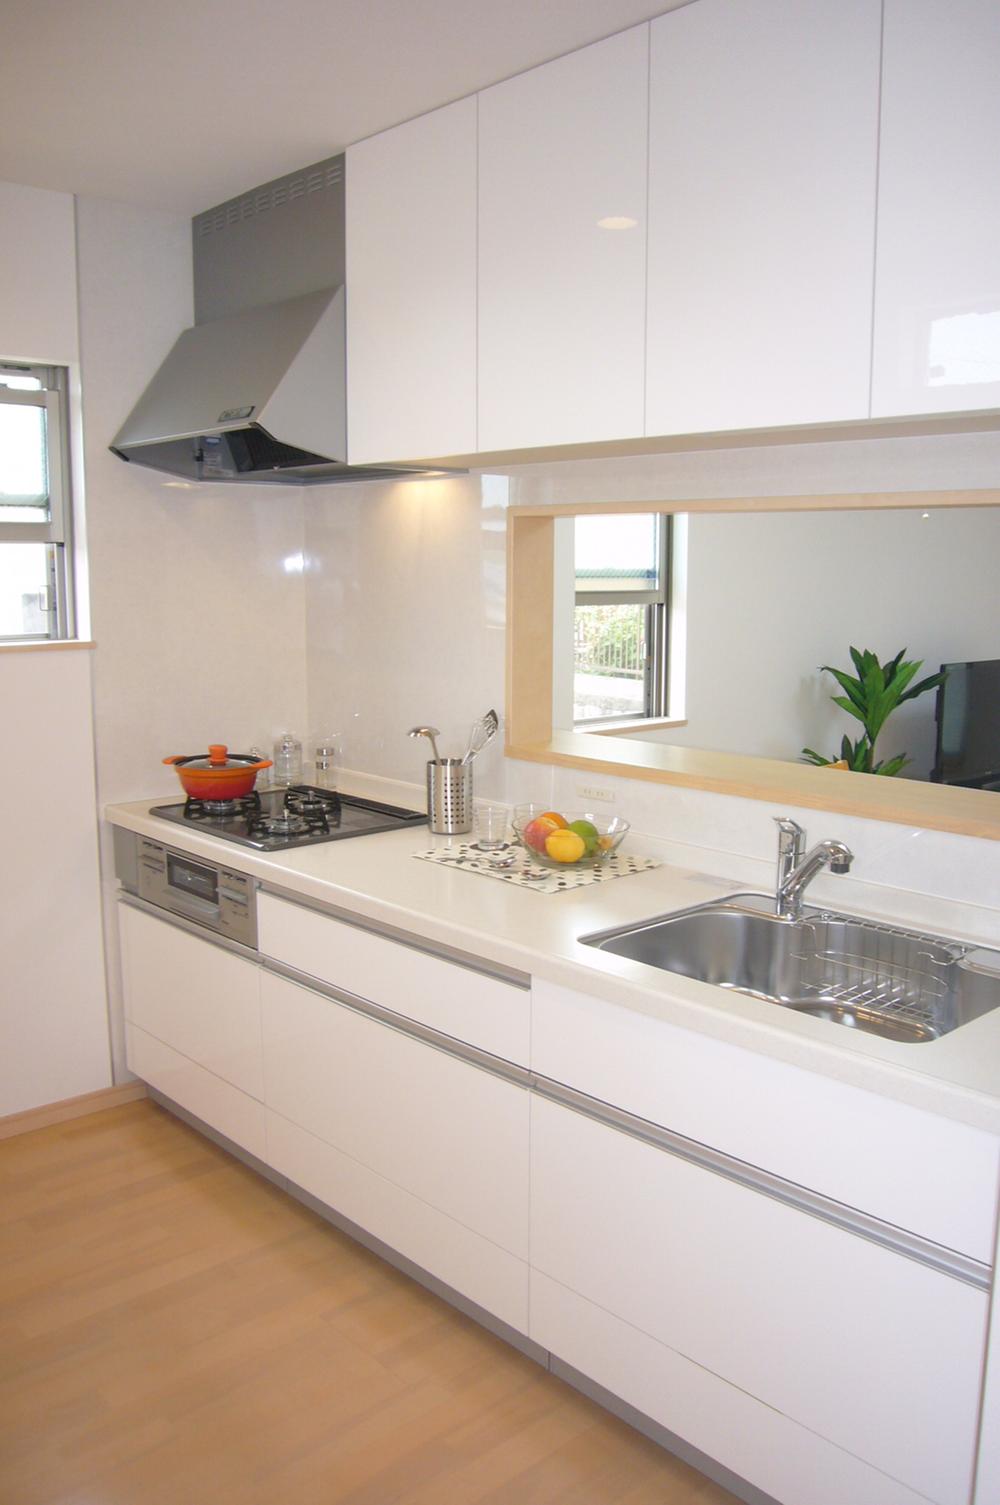 Same specifications photos (living). TOWA STYLE S specification kitchen